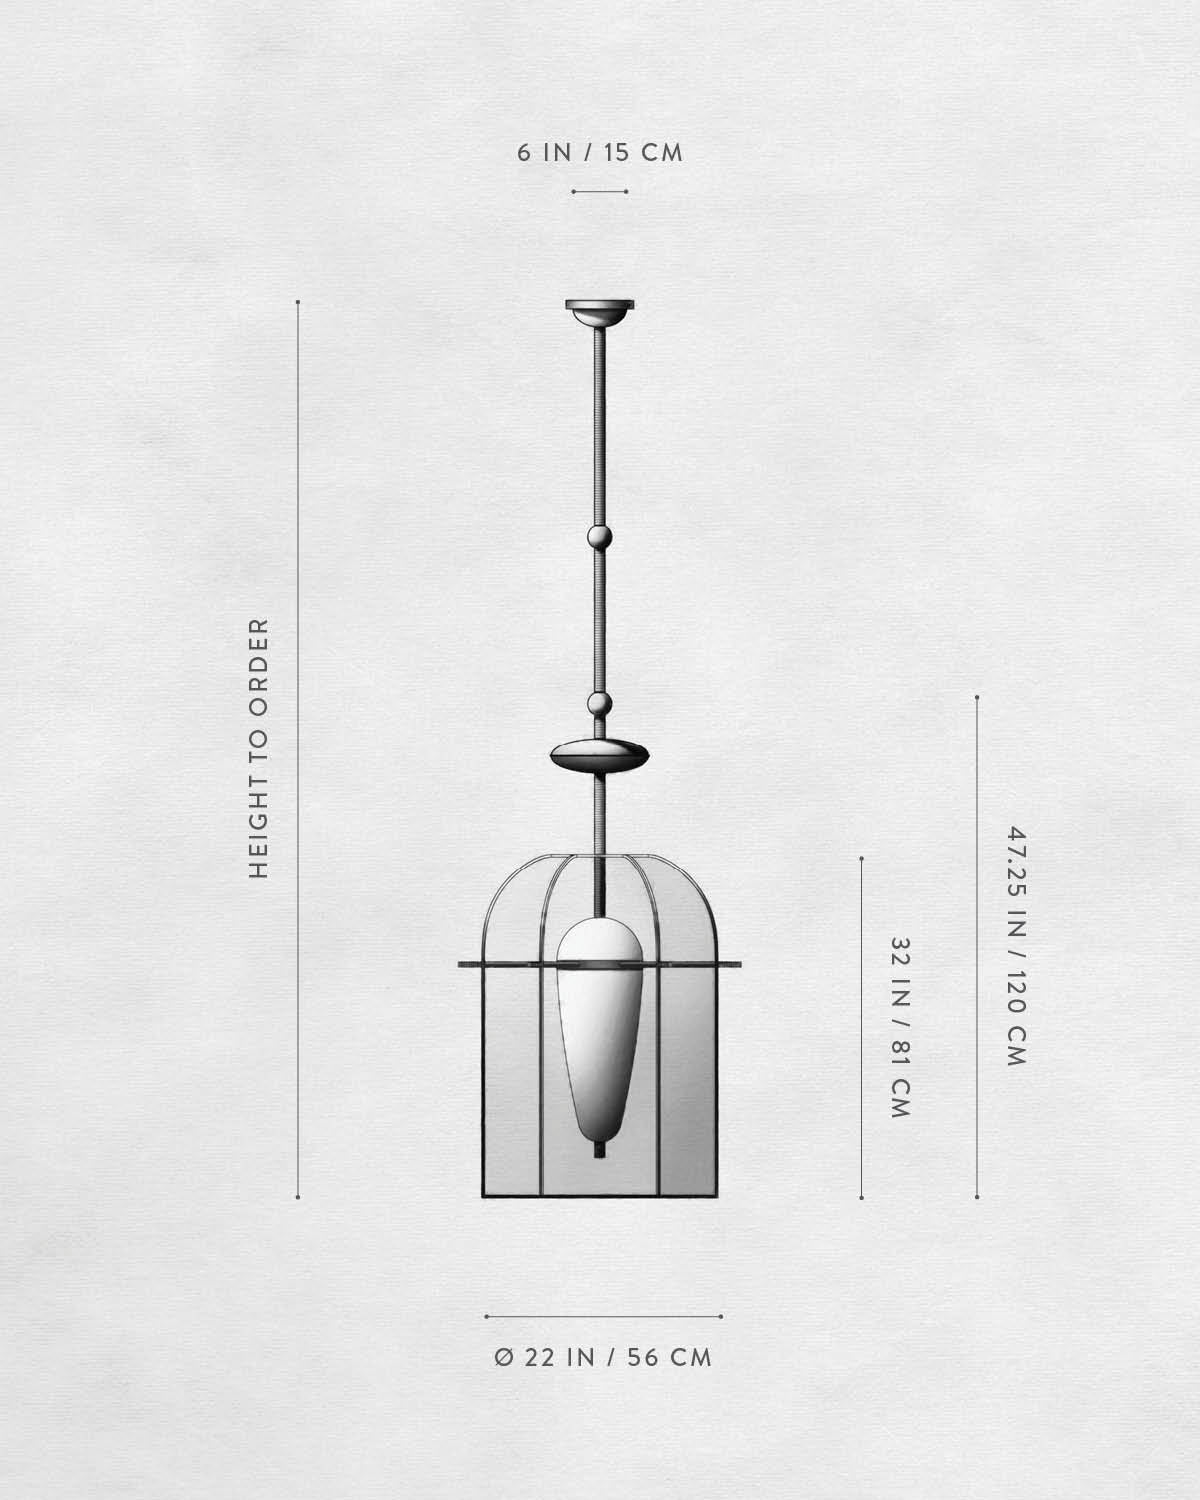 Technical drawing of INTERLUDE : HAND-EMBROIDERED HANGING LAMP.